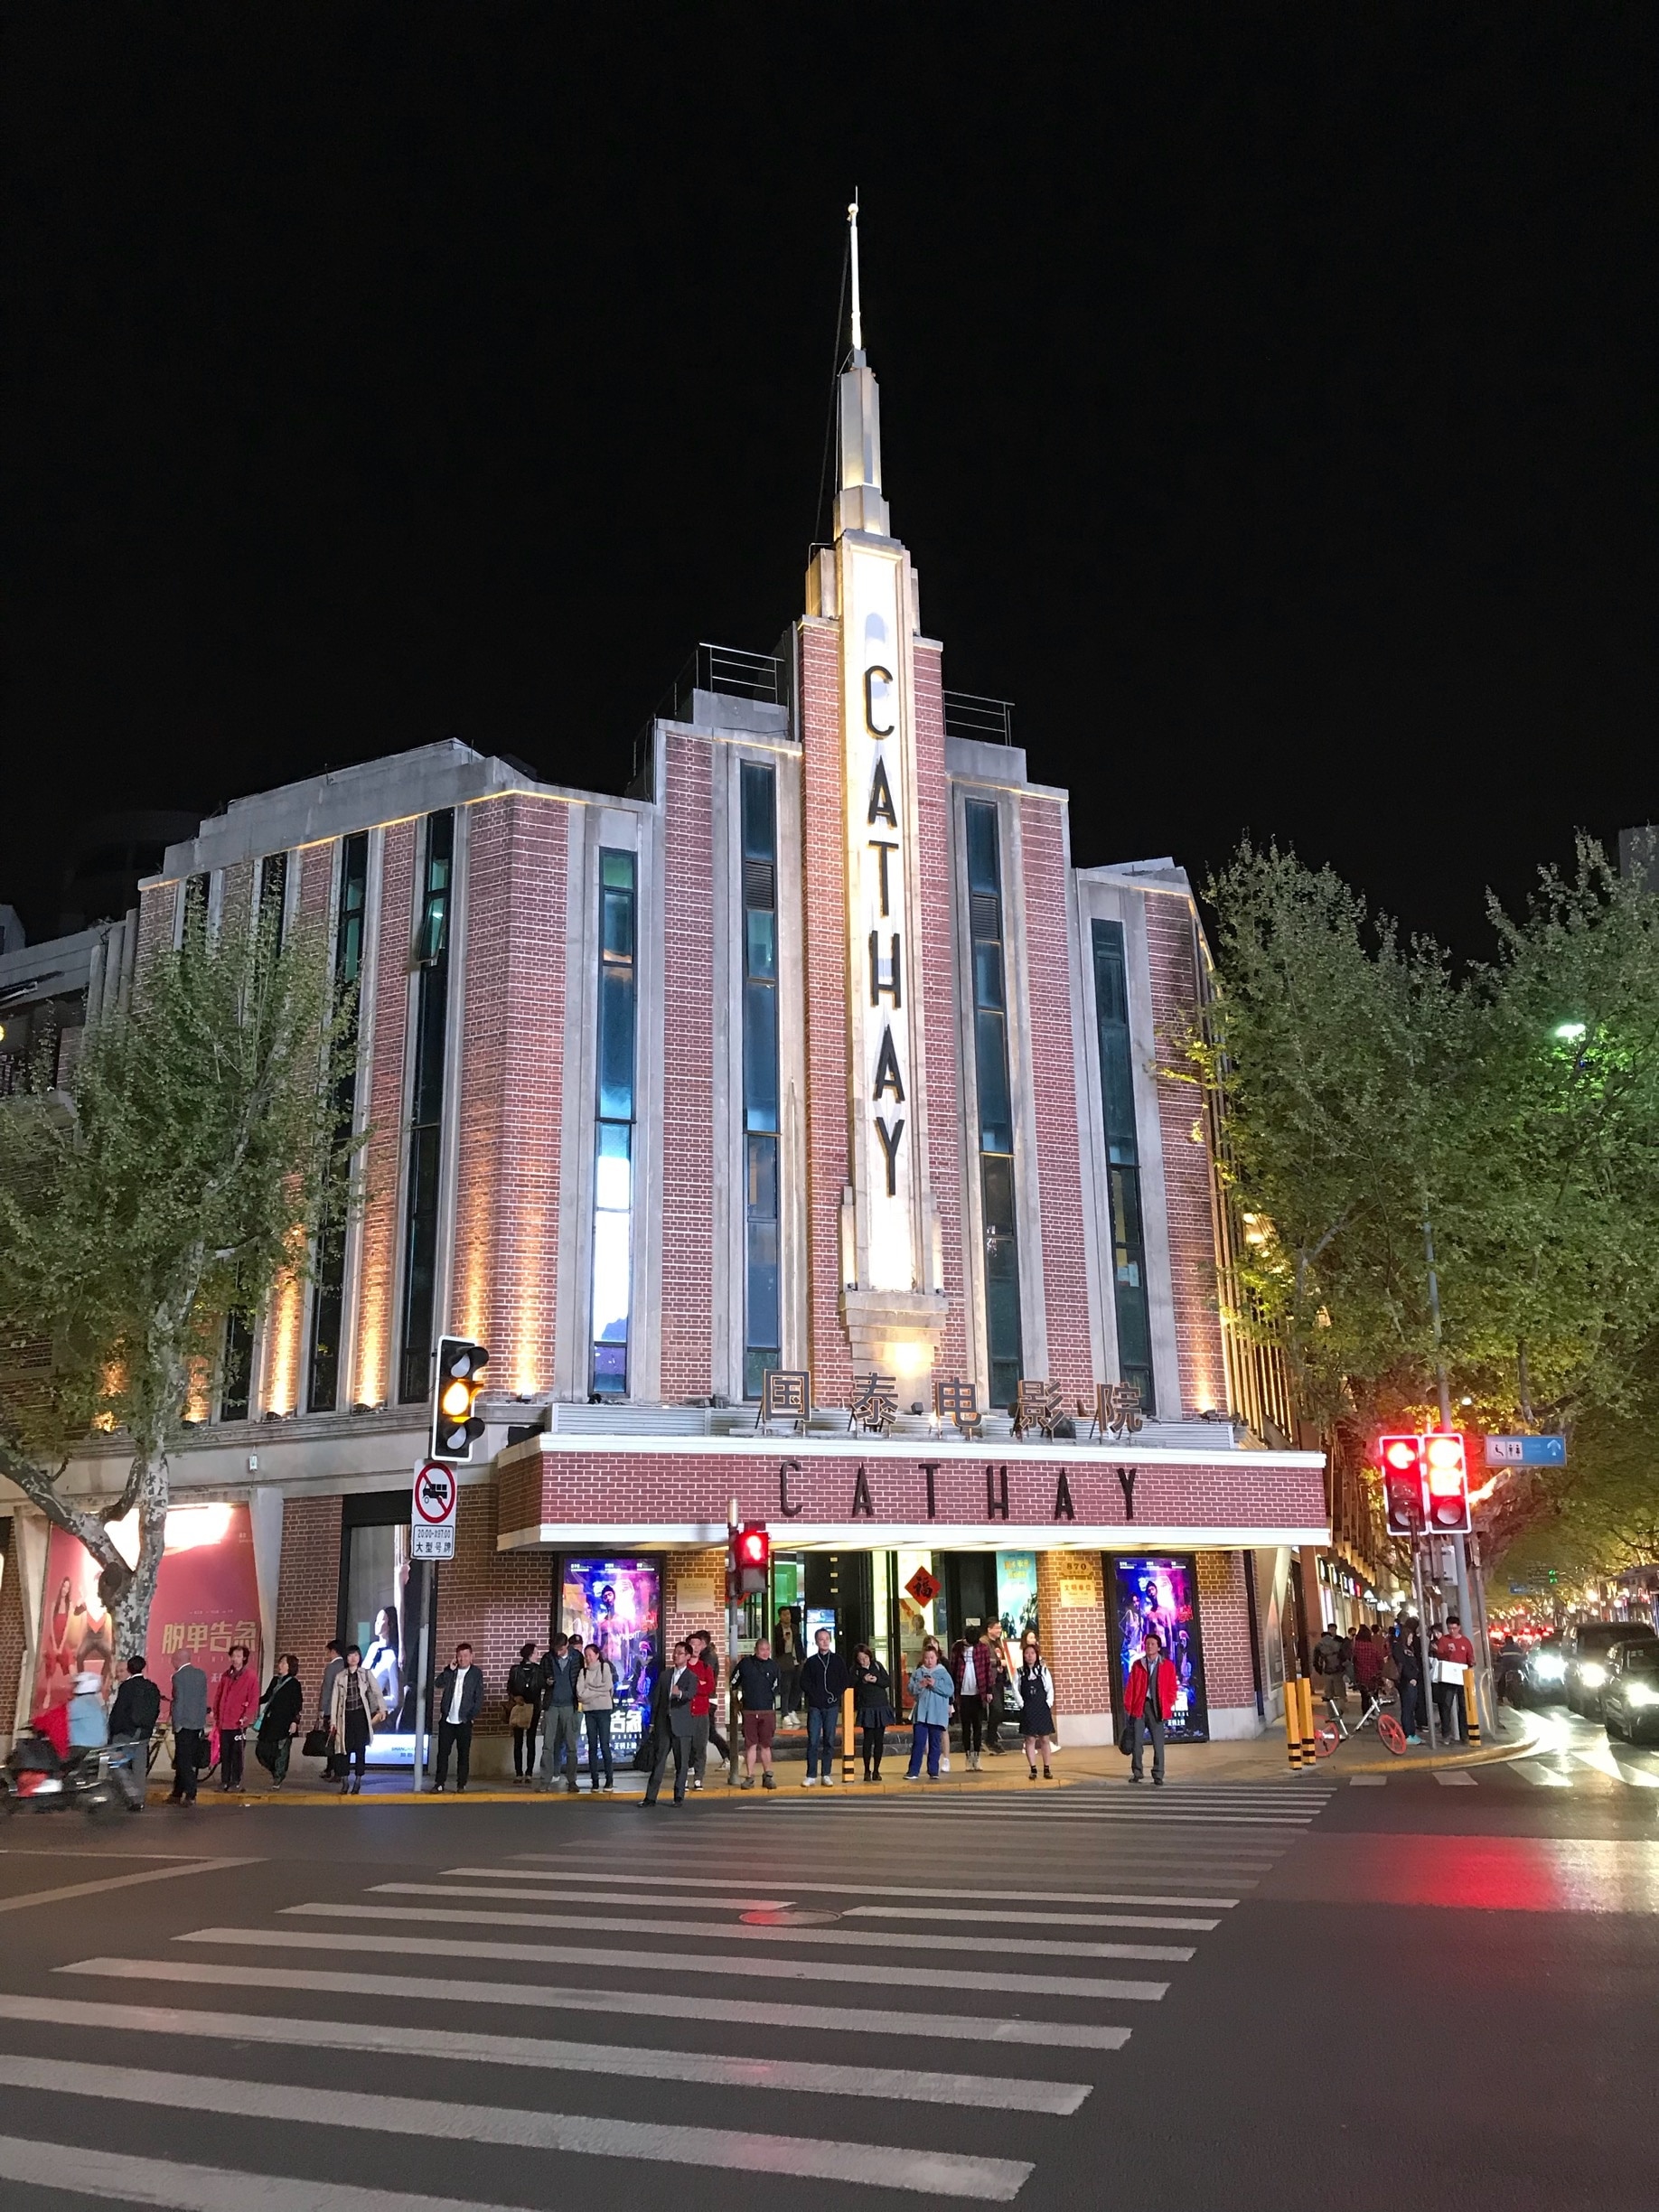 The Cathay Theatre is one of the few historic 1930’s Art Deco style cinemas that is still open in Shanghai. It opened on January 1, 1932, with 1,080 seats, all on one main floor, and with an American movie, the drama “A Free Soul” starring Norma Shearer.